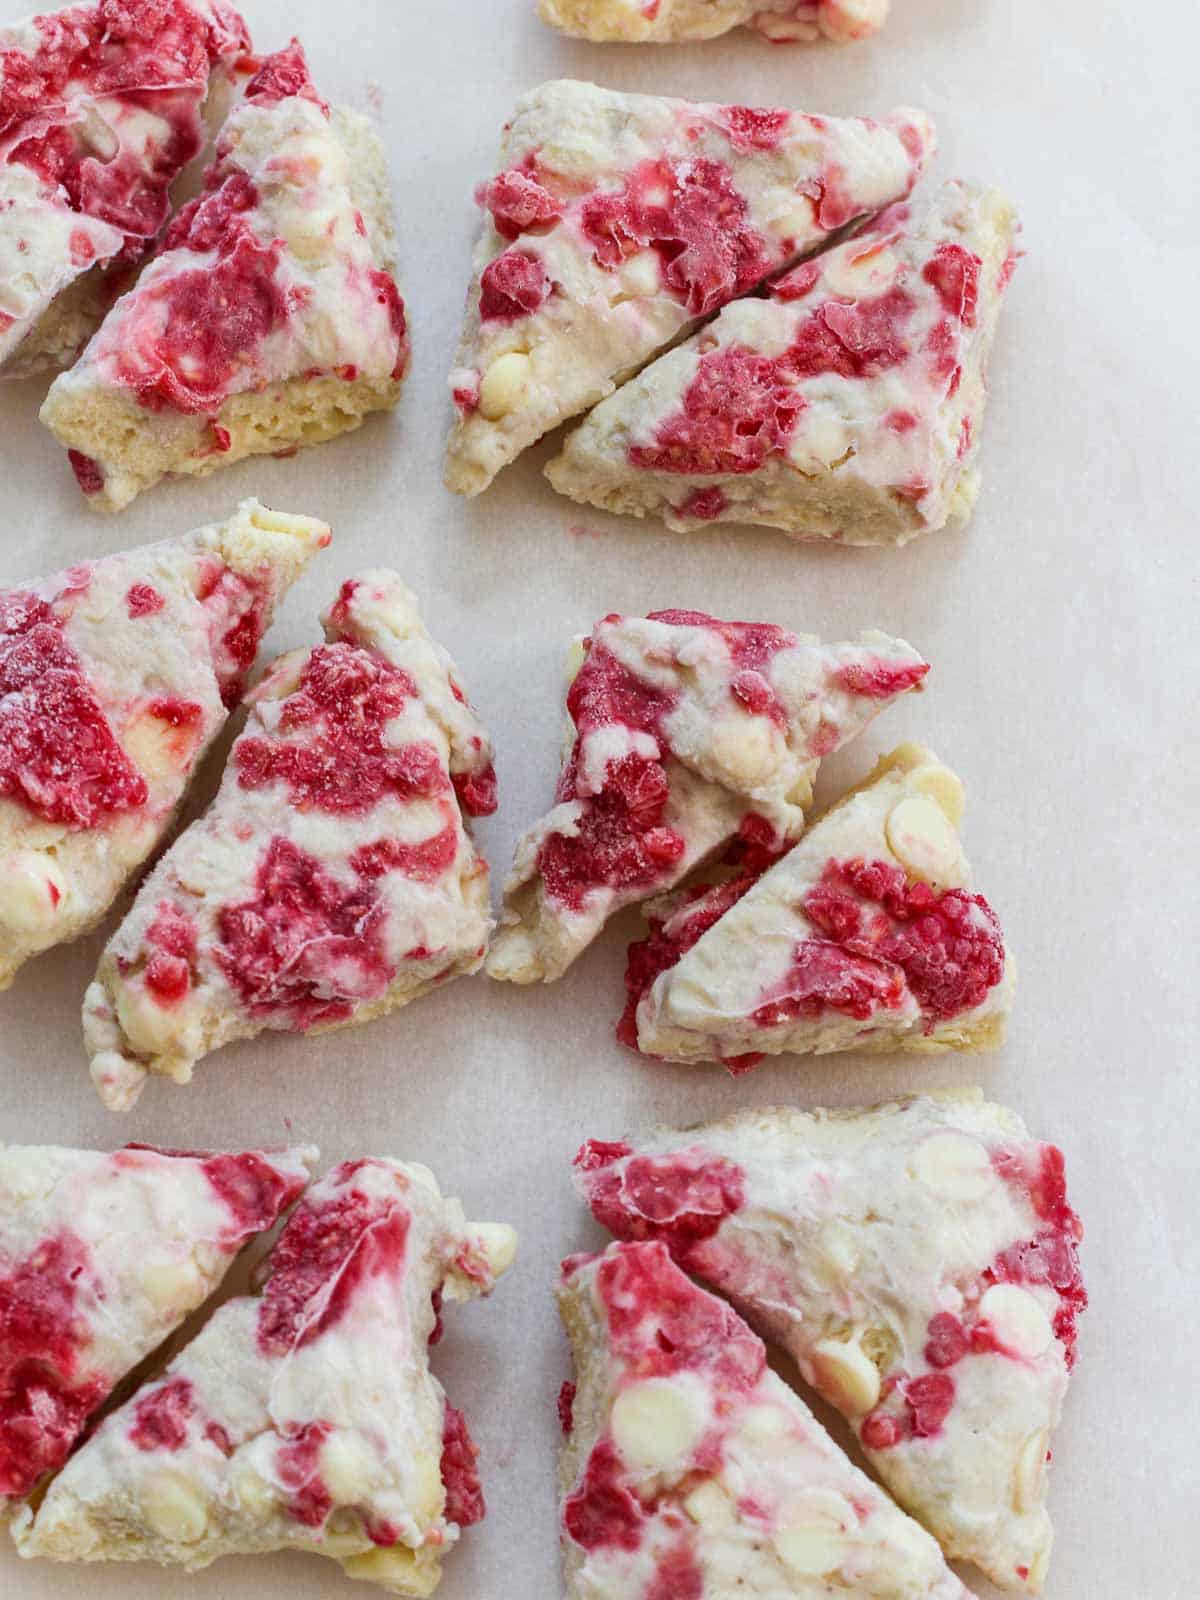 Frozen raspberry scones dough cut and studded with white chocolate chips and sweet red raspberries.